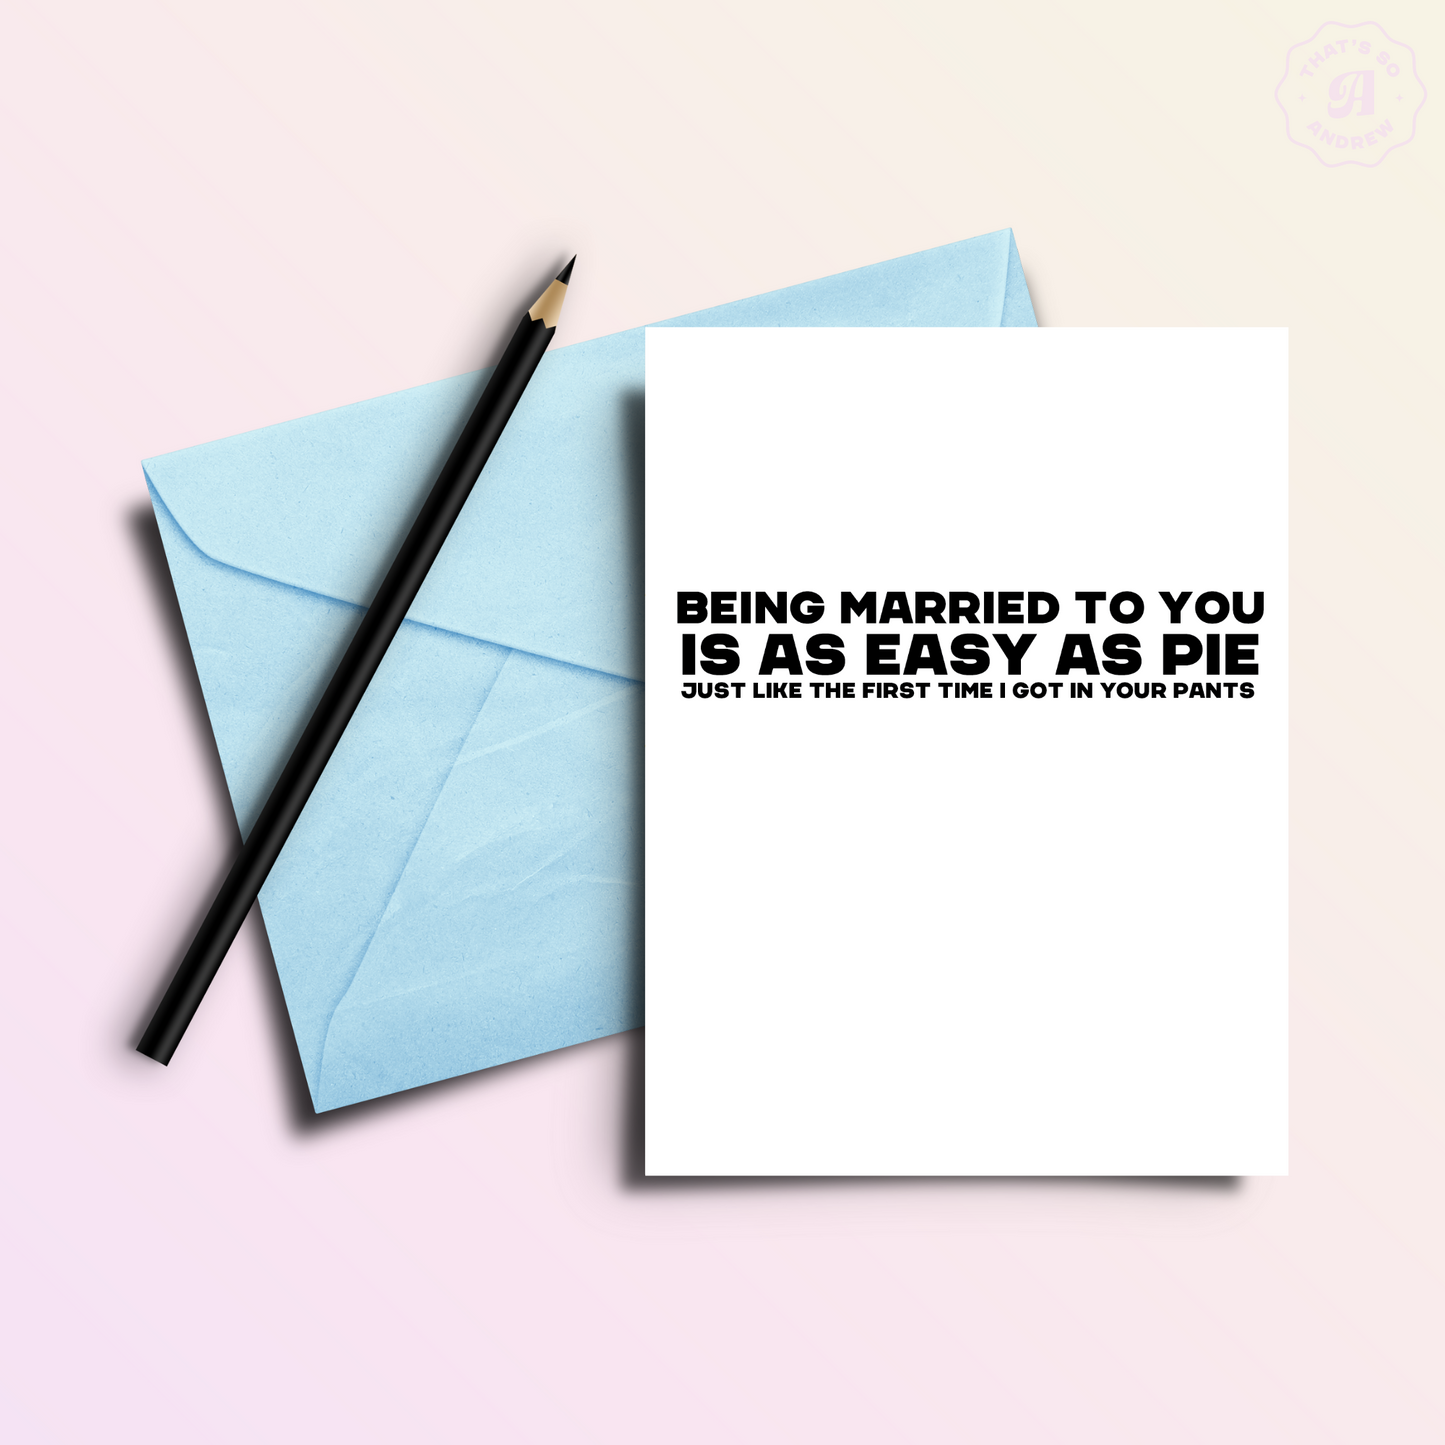 You're Easy | Funny and Dirty Adult Anniversary Greeting Card